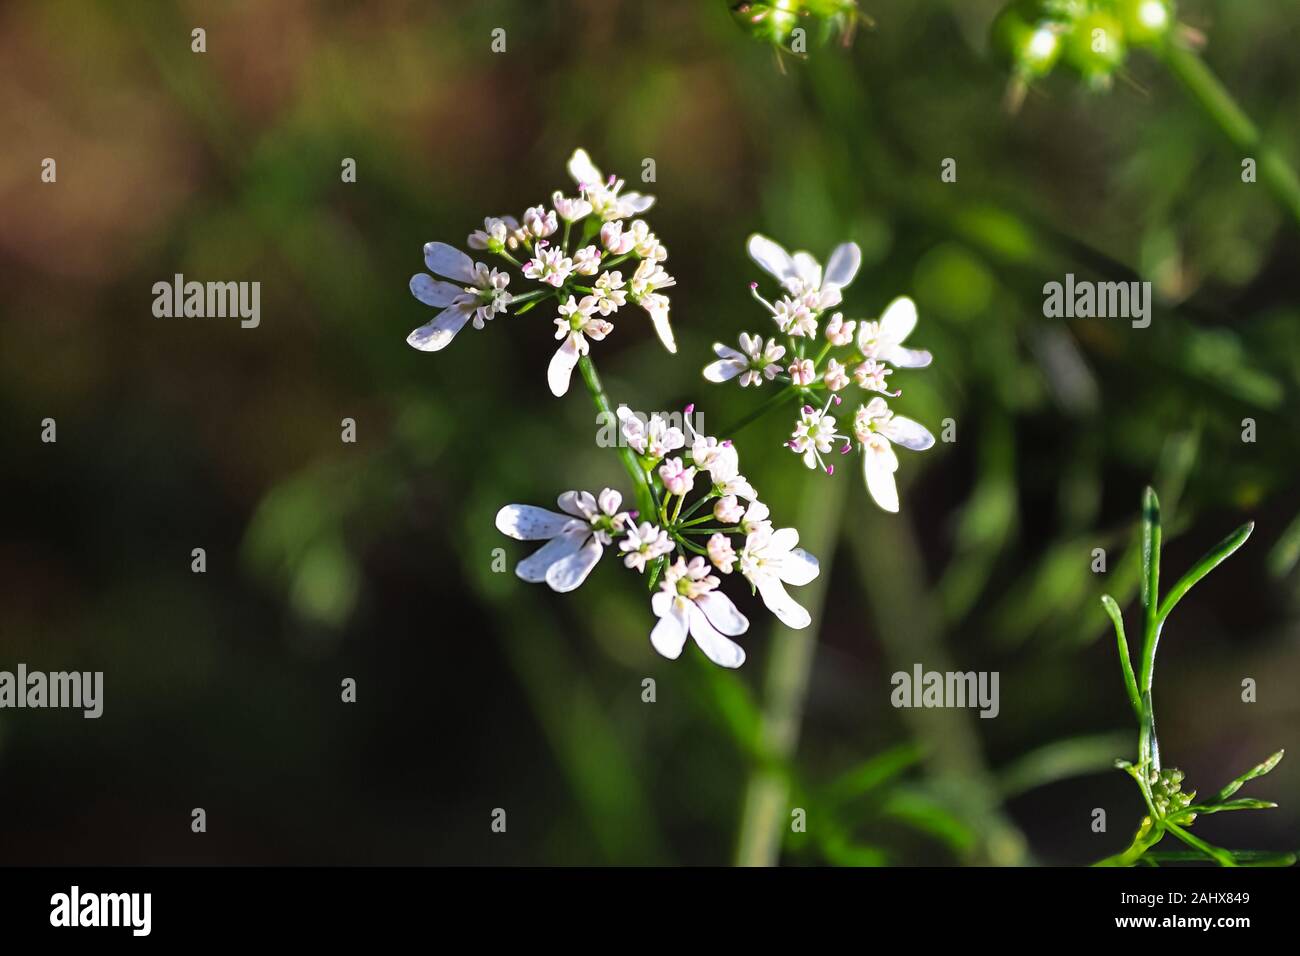 Closeup of green cilantro flowers blooming on umbels Stock Photo